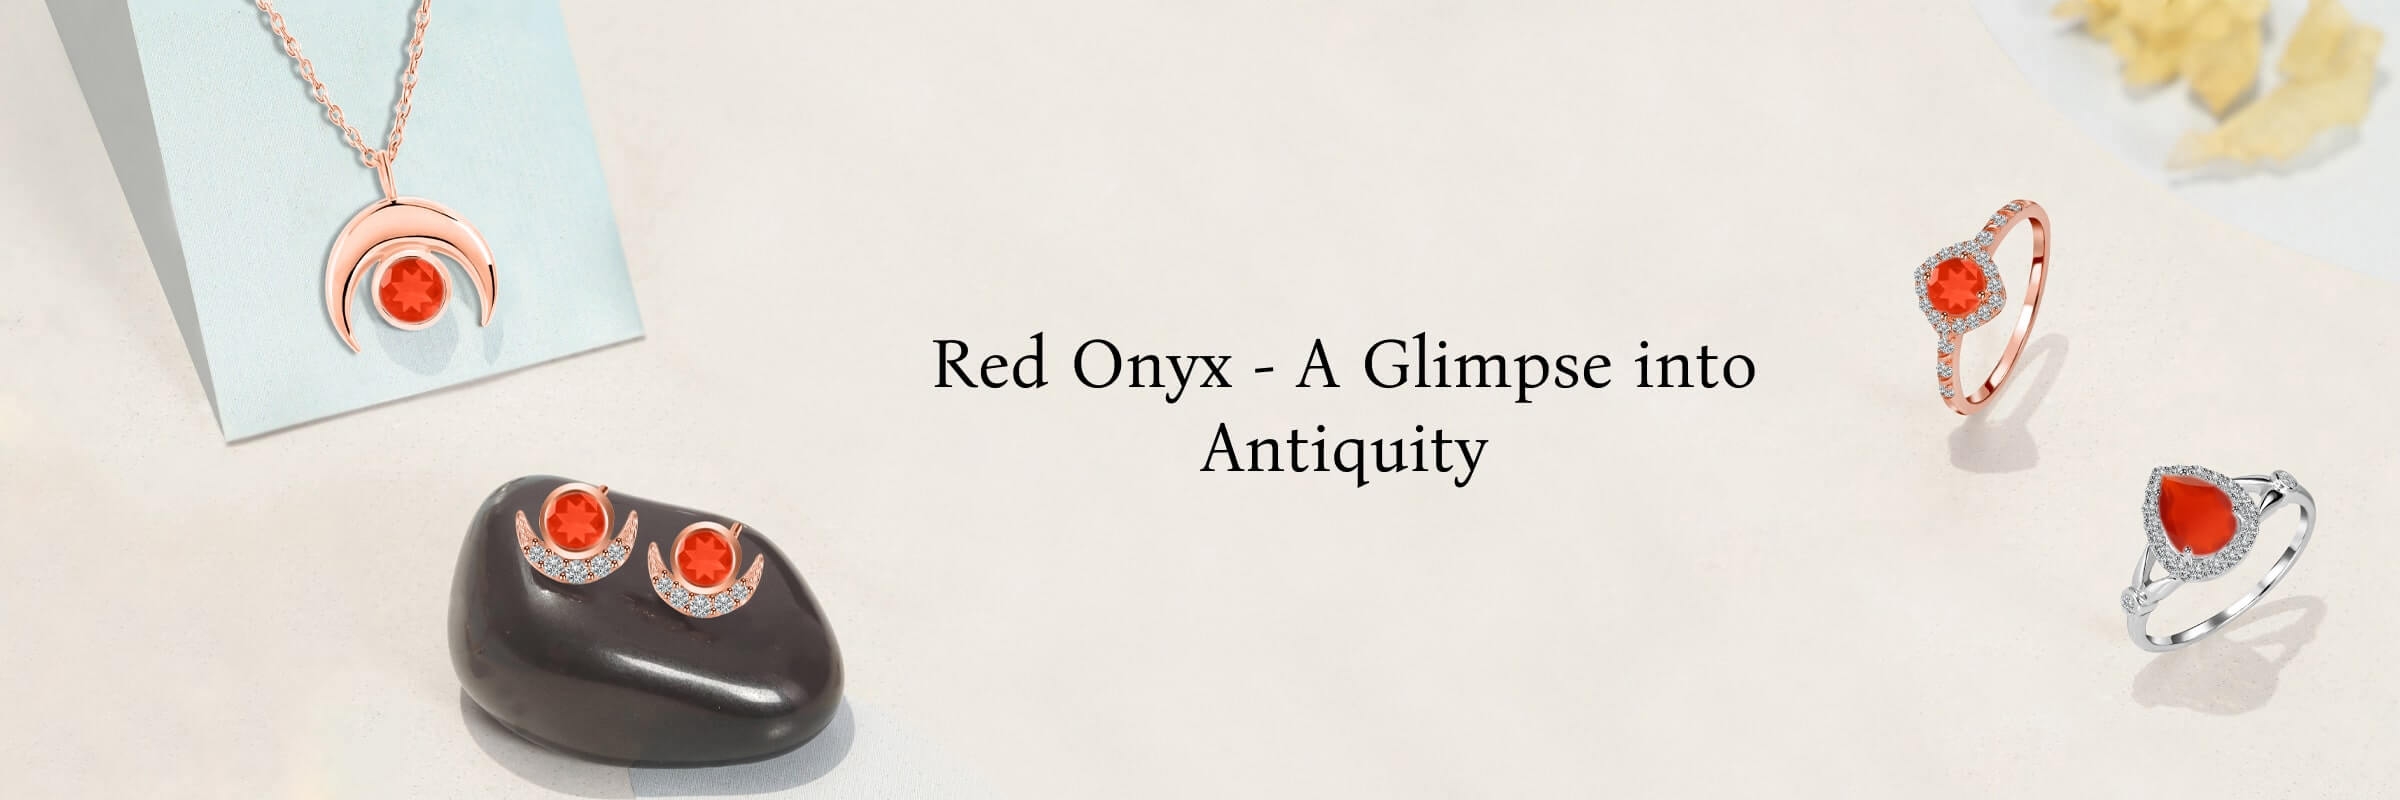 History of Red Onyx Stone